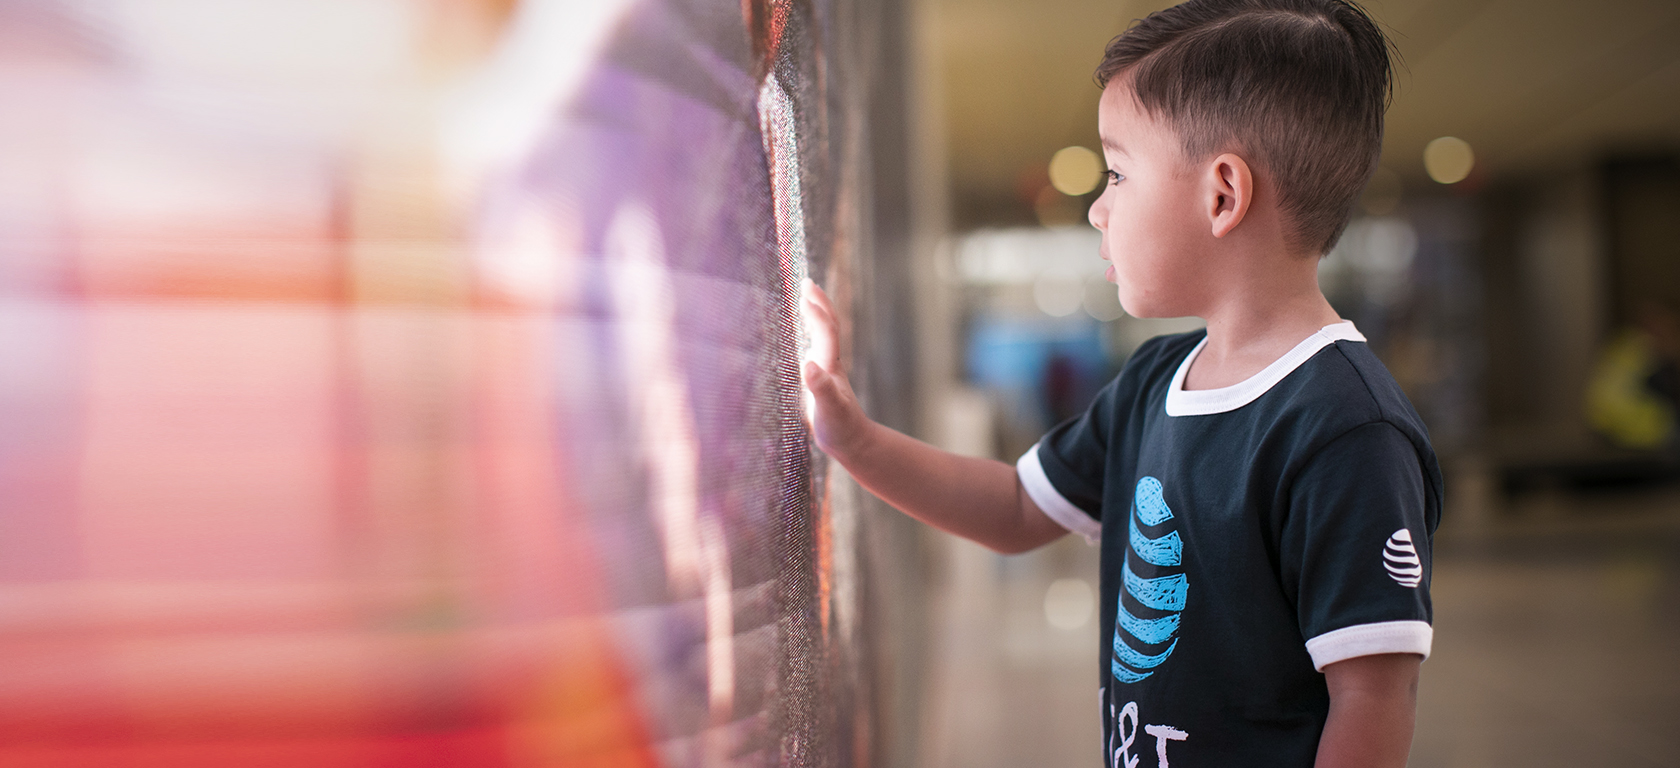 AT&T Brand Shop - Kids Styles